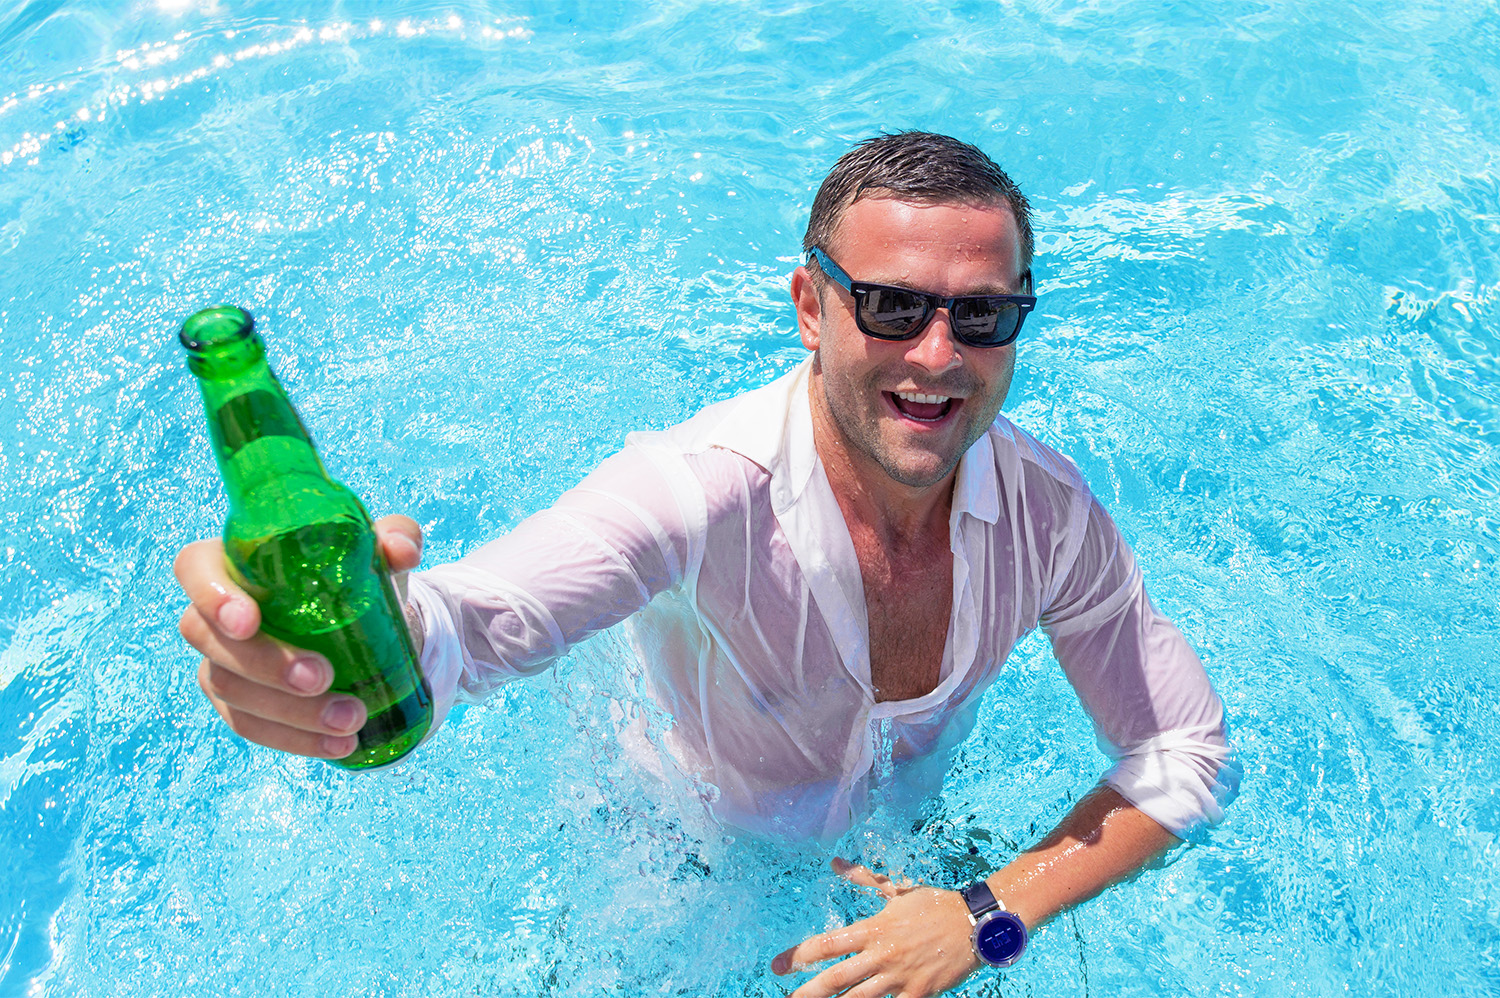 Man in a pol holding a green beer bottle, enjoying his bachelor party.